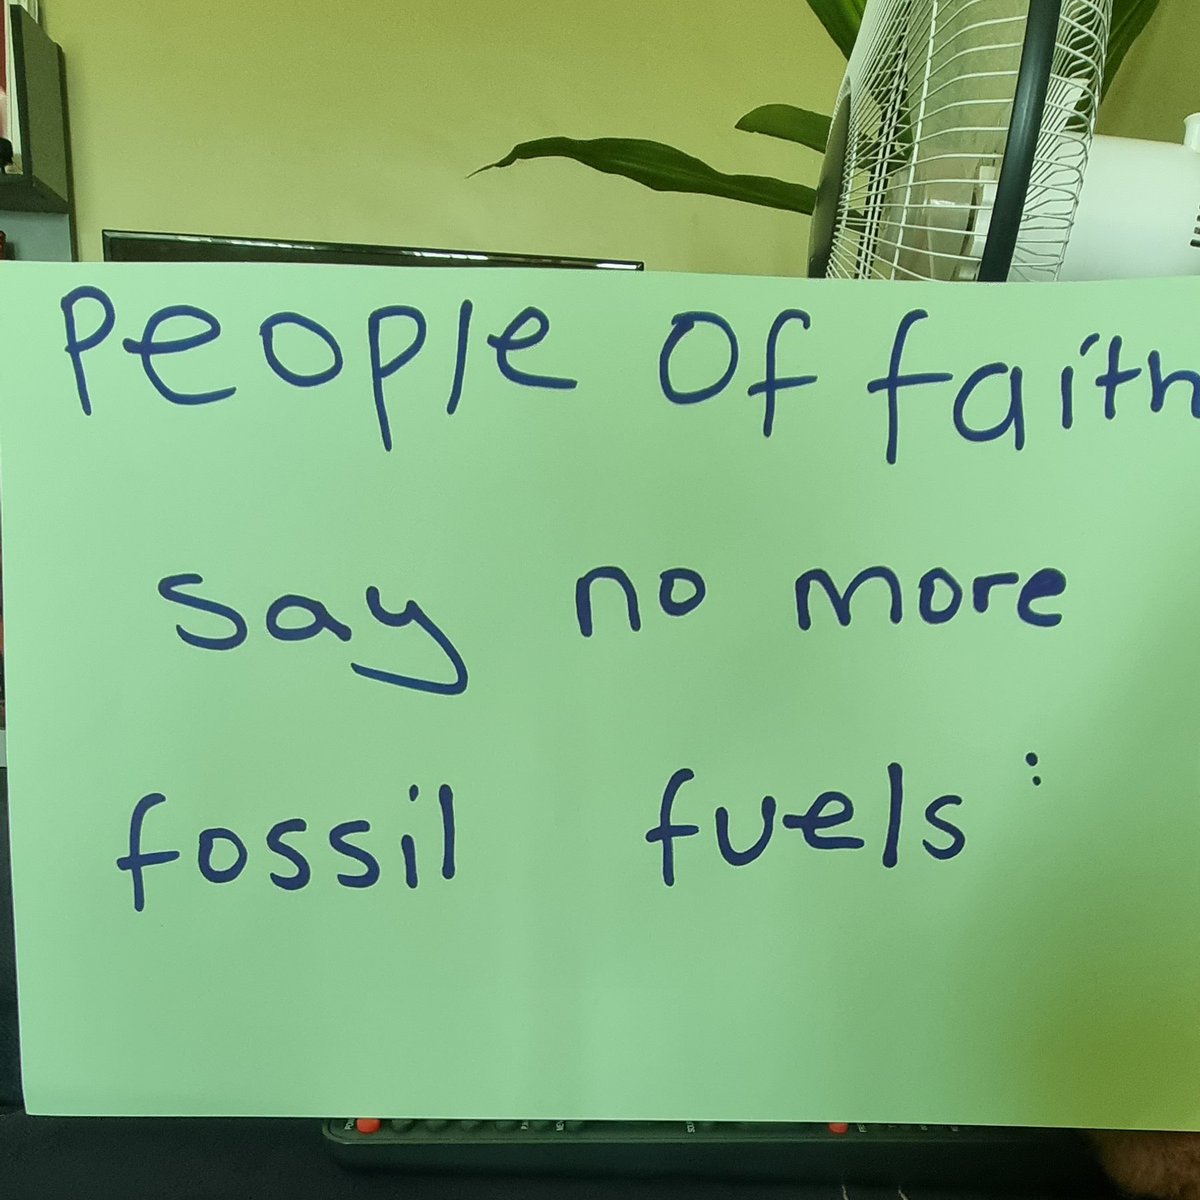 People of faith say no more fossil fuels. 
#climatejustice 
#Riseupmouvement